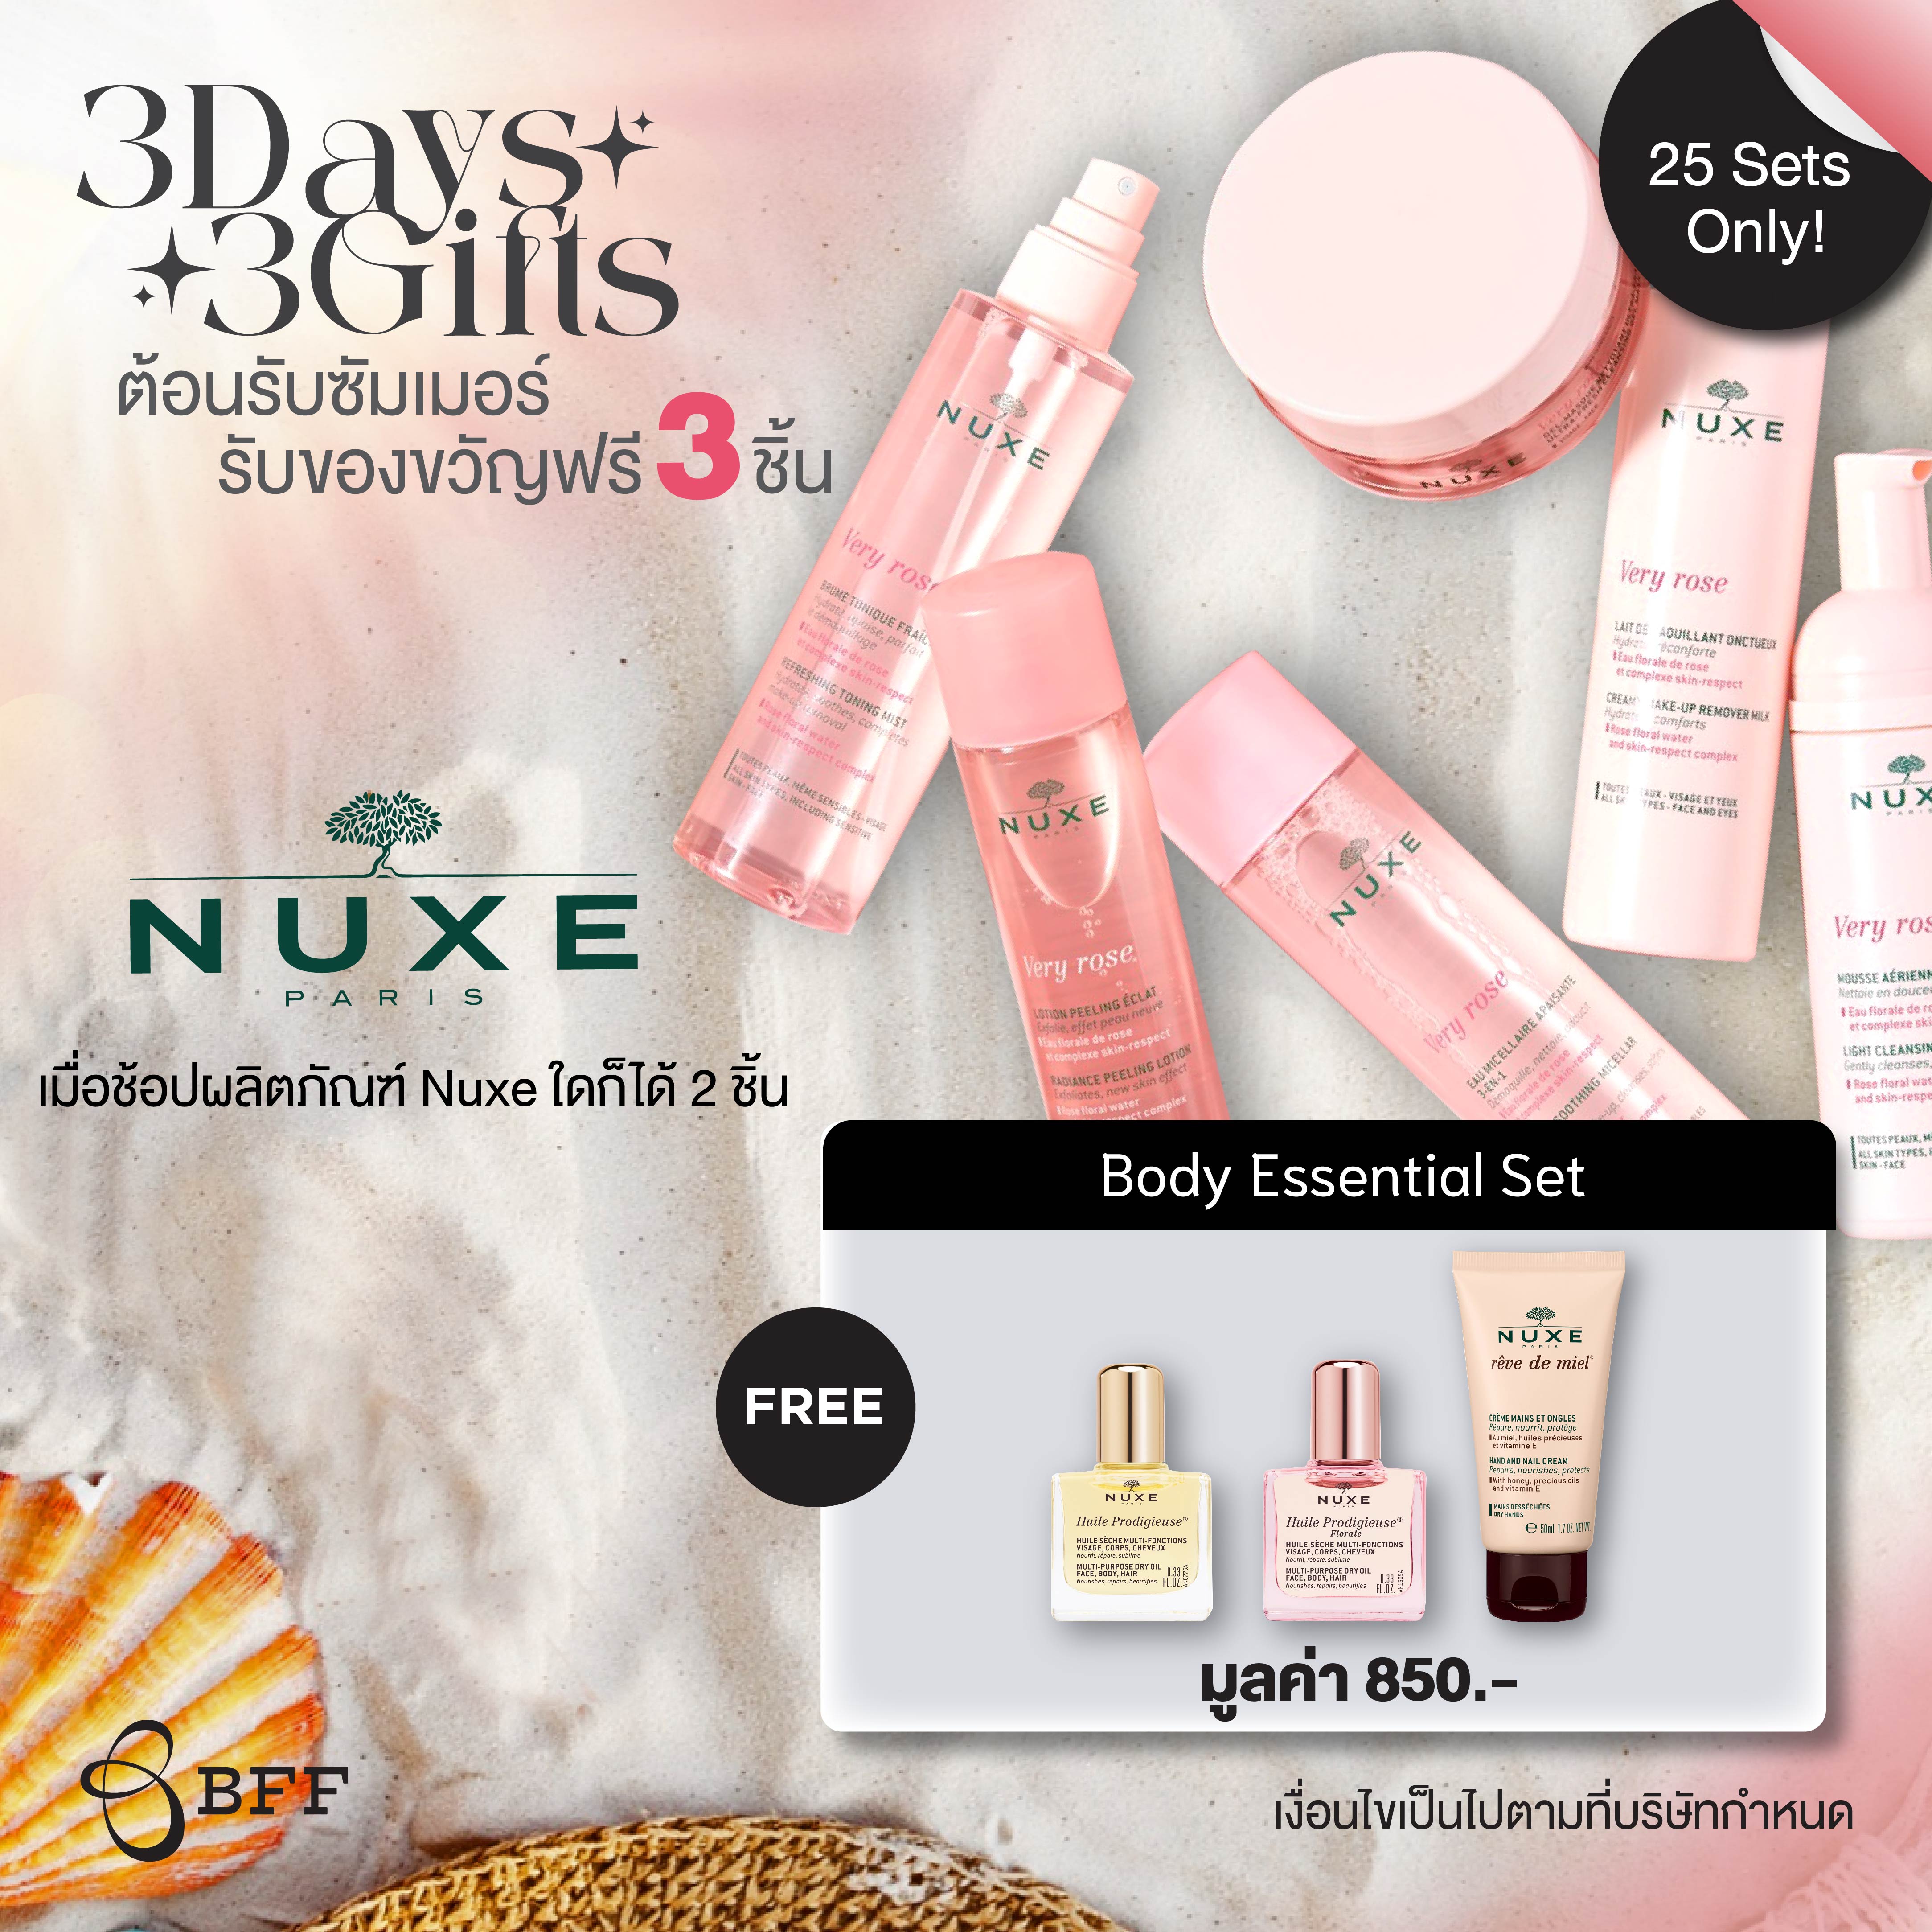 NUXE 3DAYS 3GIFTS